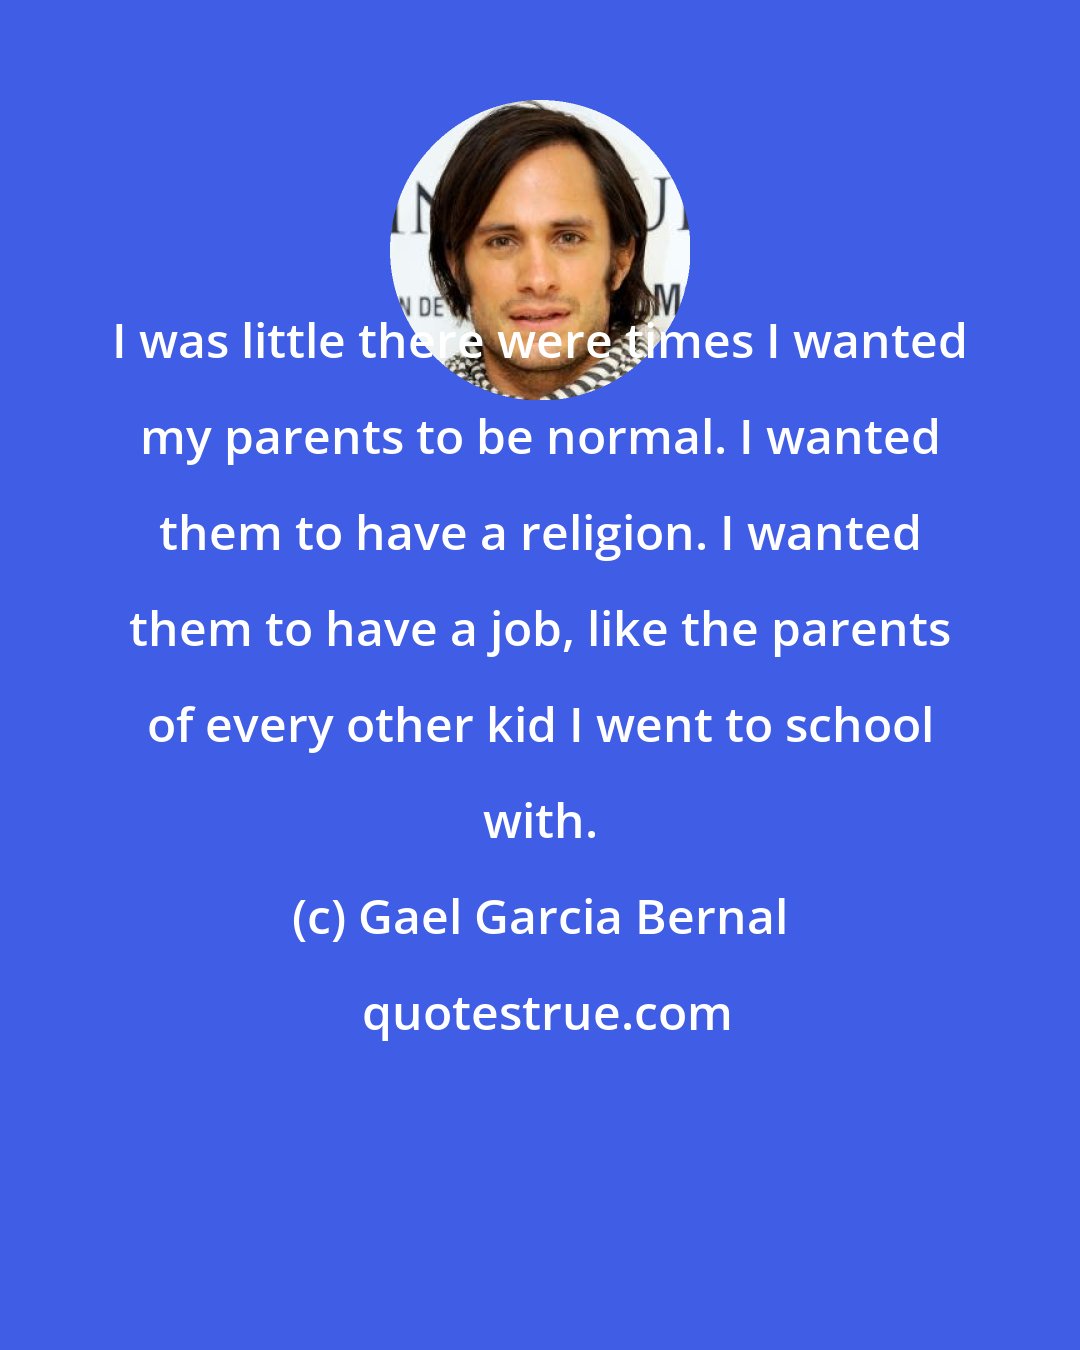 Gael Garcia Bernal: I was little there were times I wanted my parents to be normal. I wanted them to have a religion. I wanted them to have a job, like the parents of every other kid I went to school with.